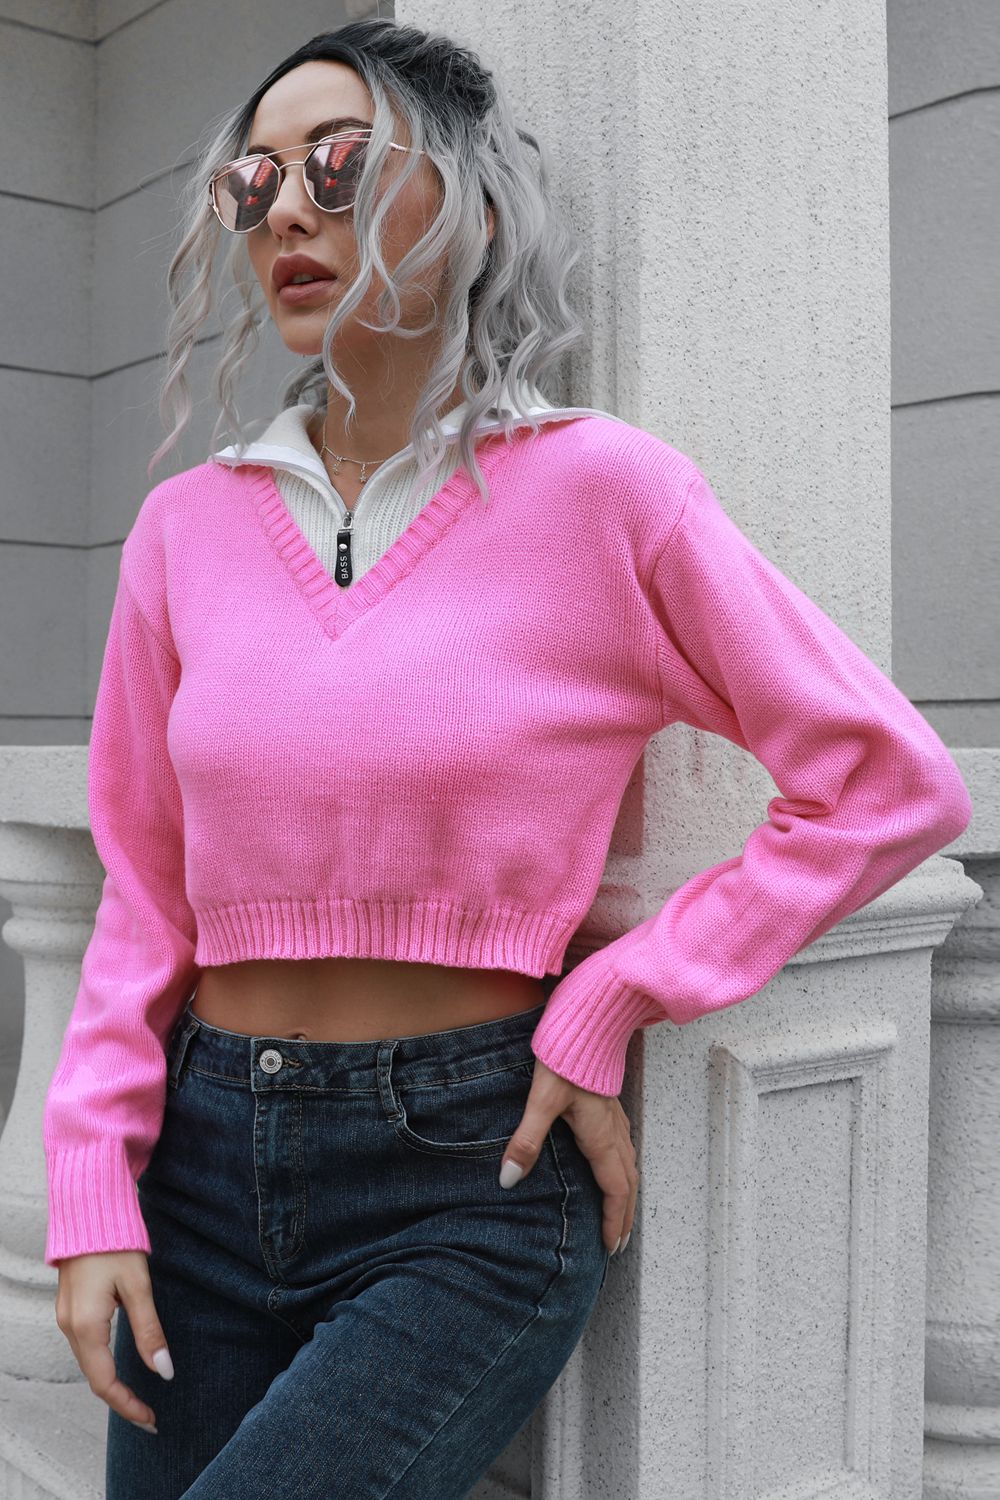 Contrast Collared Cropped Sweater BLUE ZONE PLANET